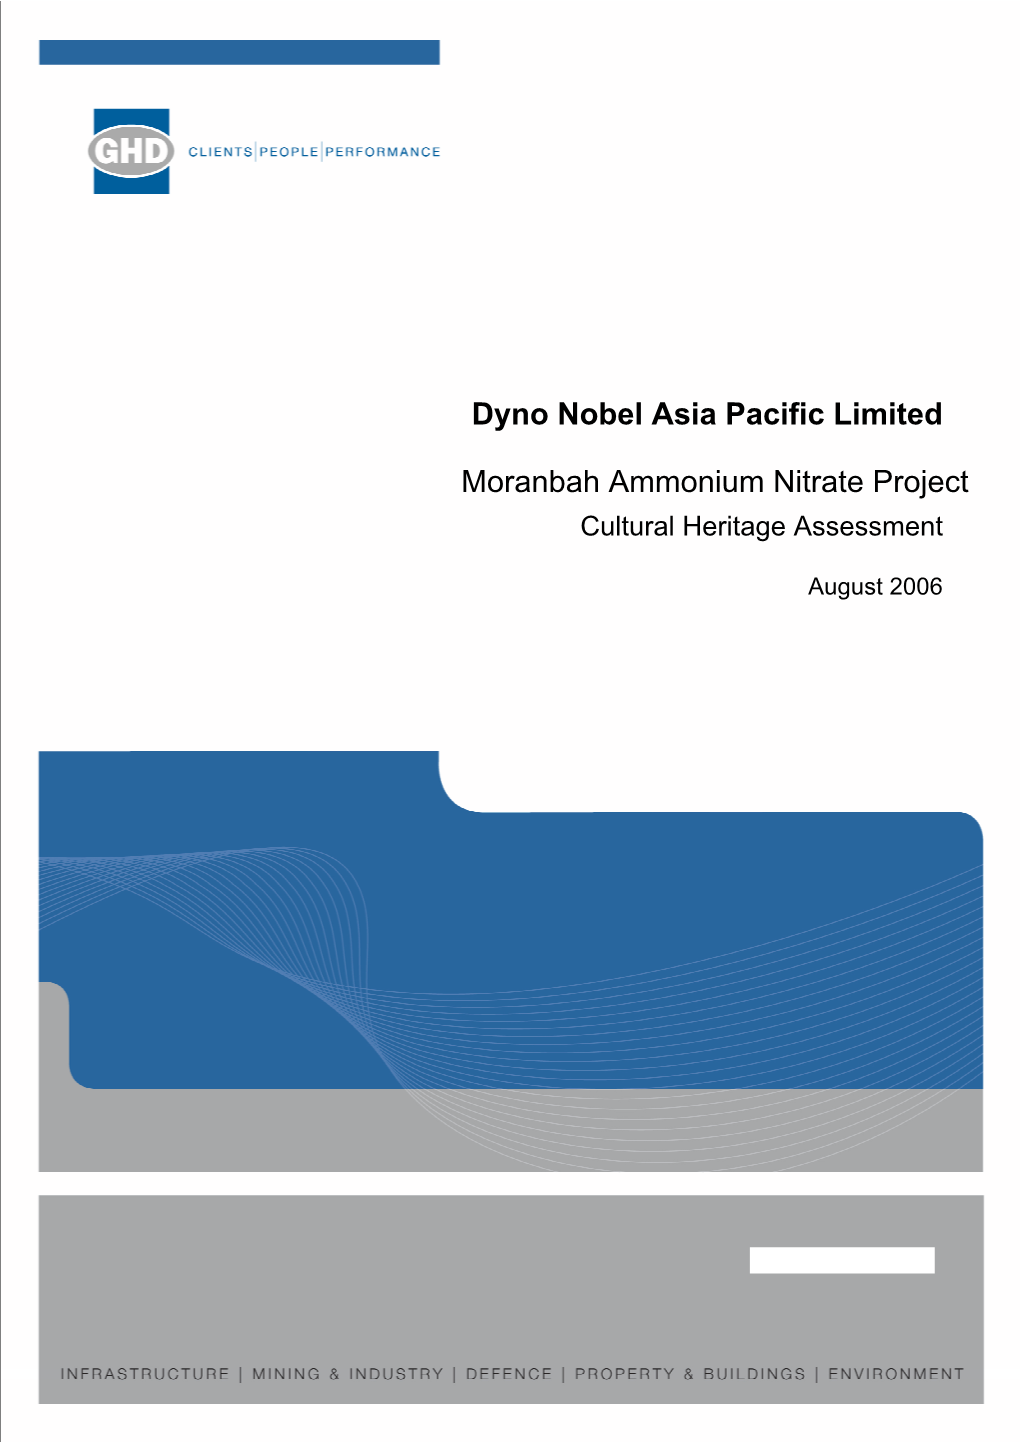 Dyno Nobel Asia Pacific Limited Moranbah Ammonium Nitrate Project